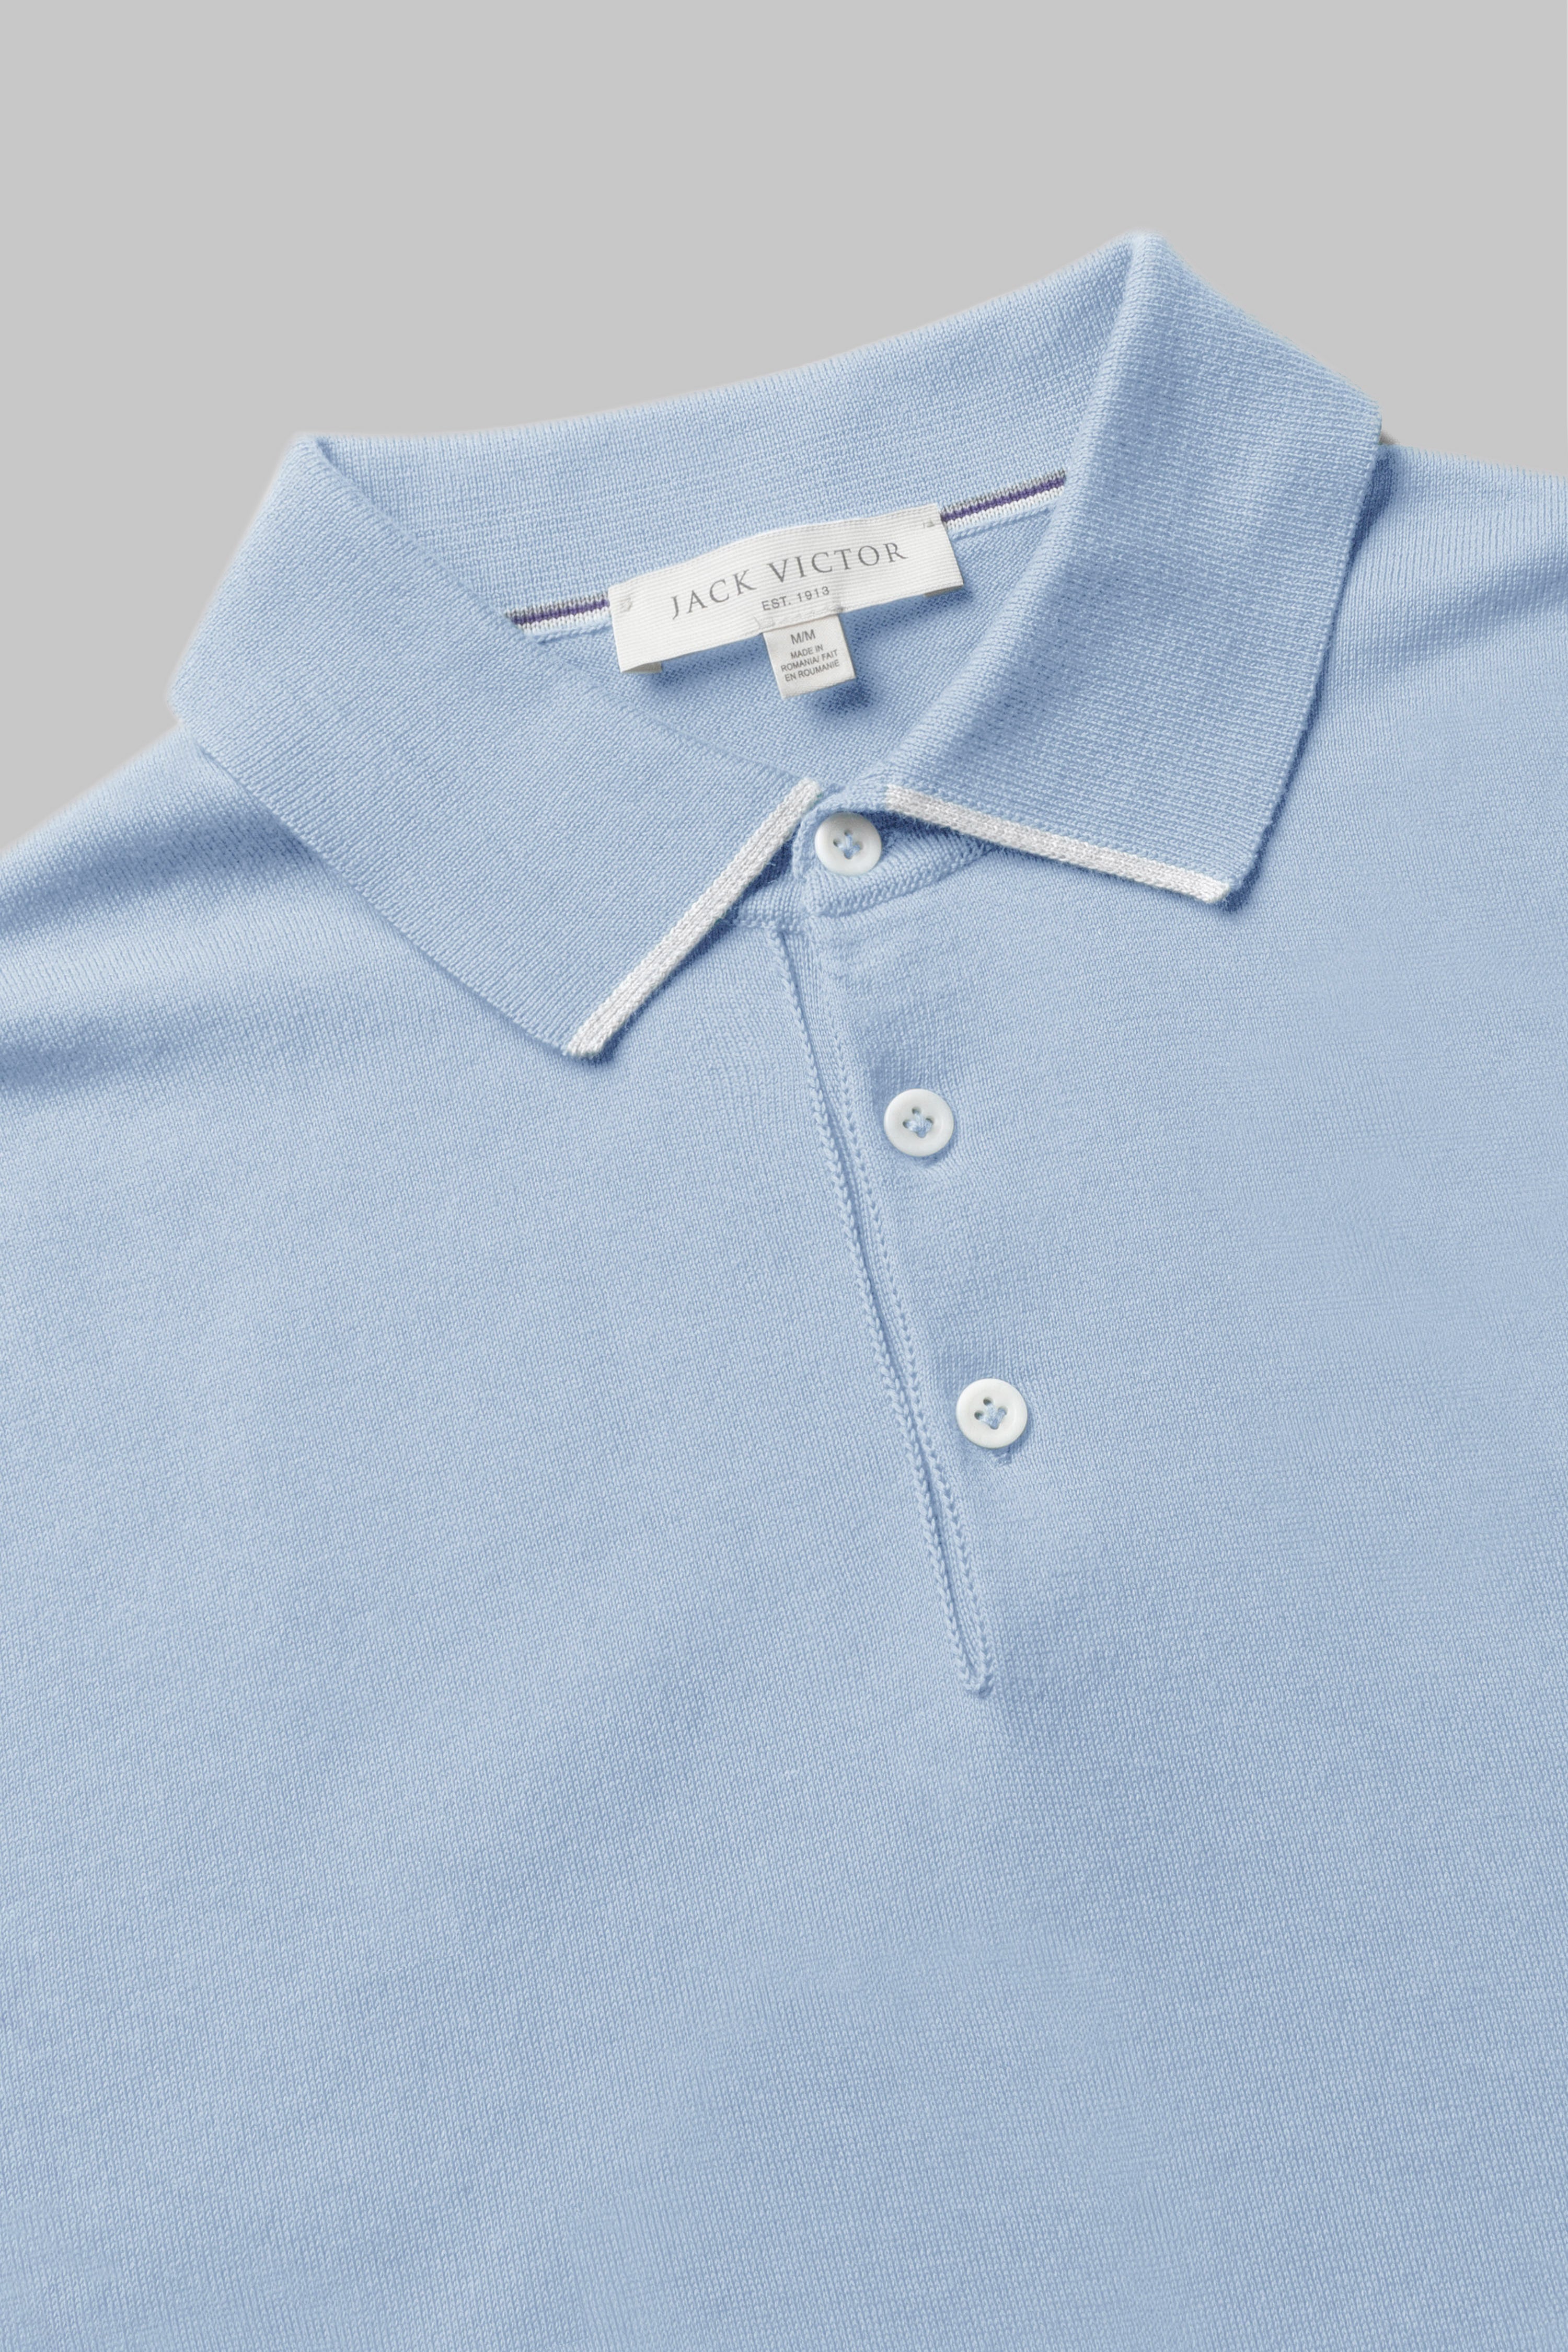 Image of Roslyn Cotton Knit Polo in Sky Blue-Jack Victor